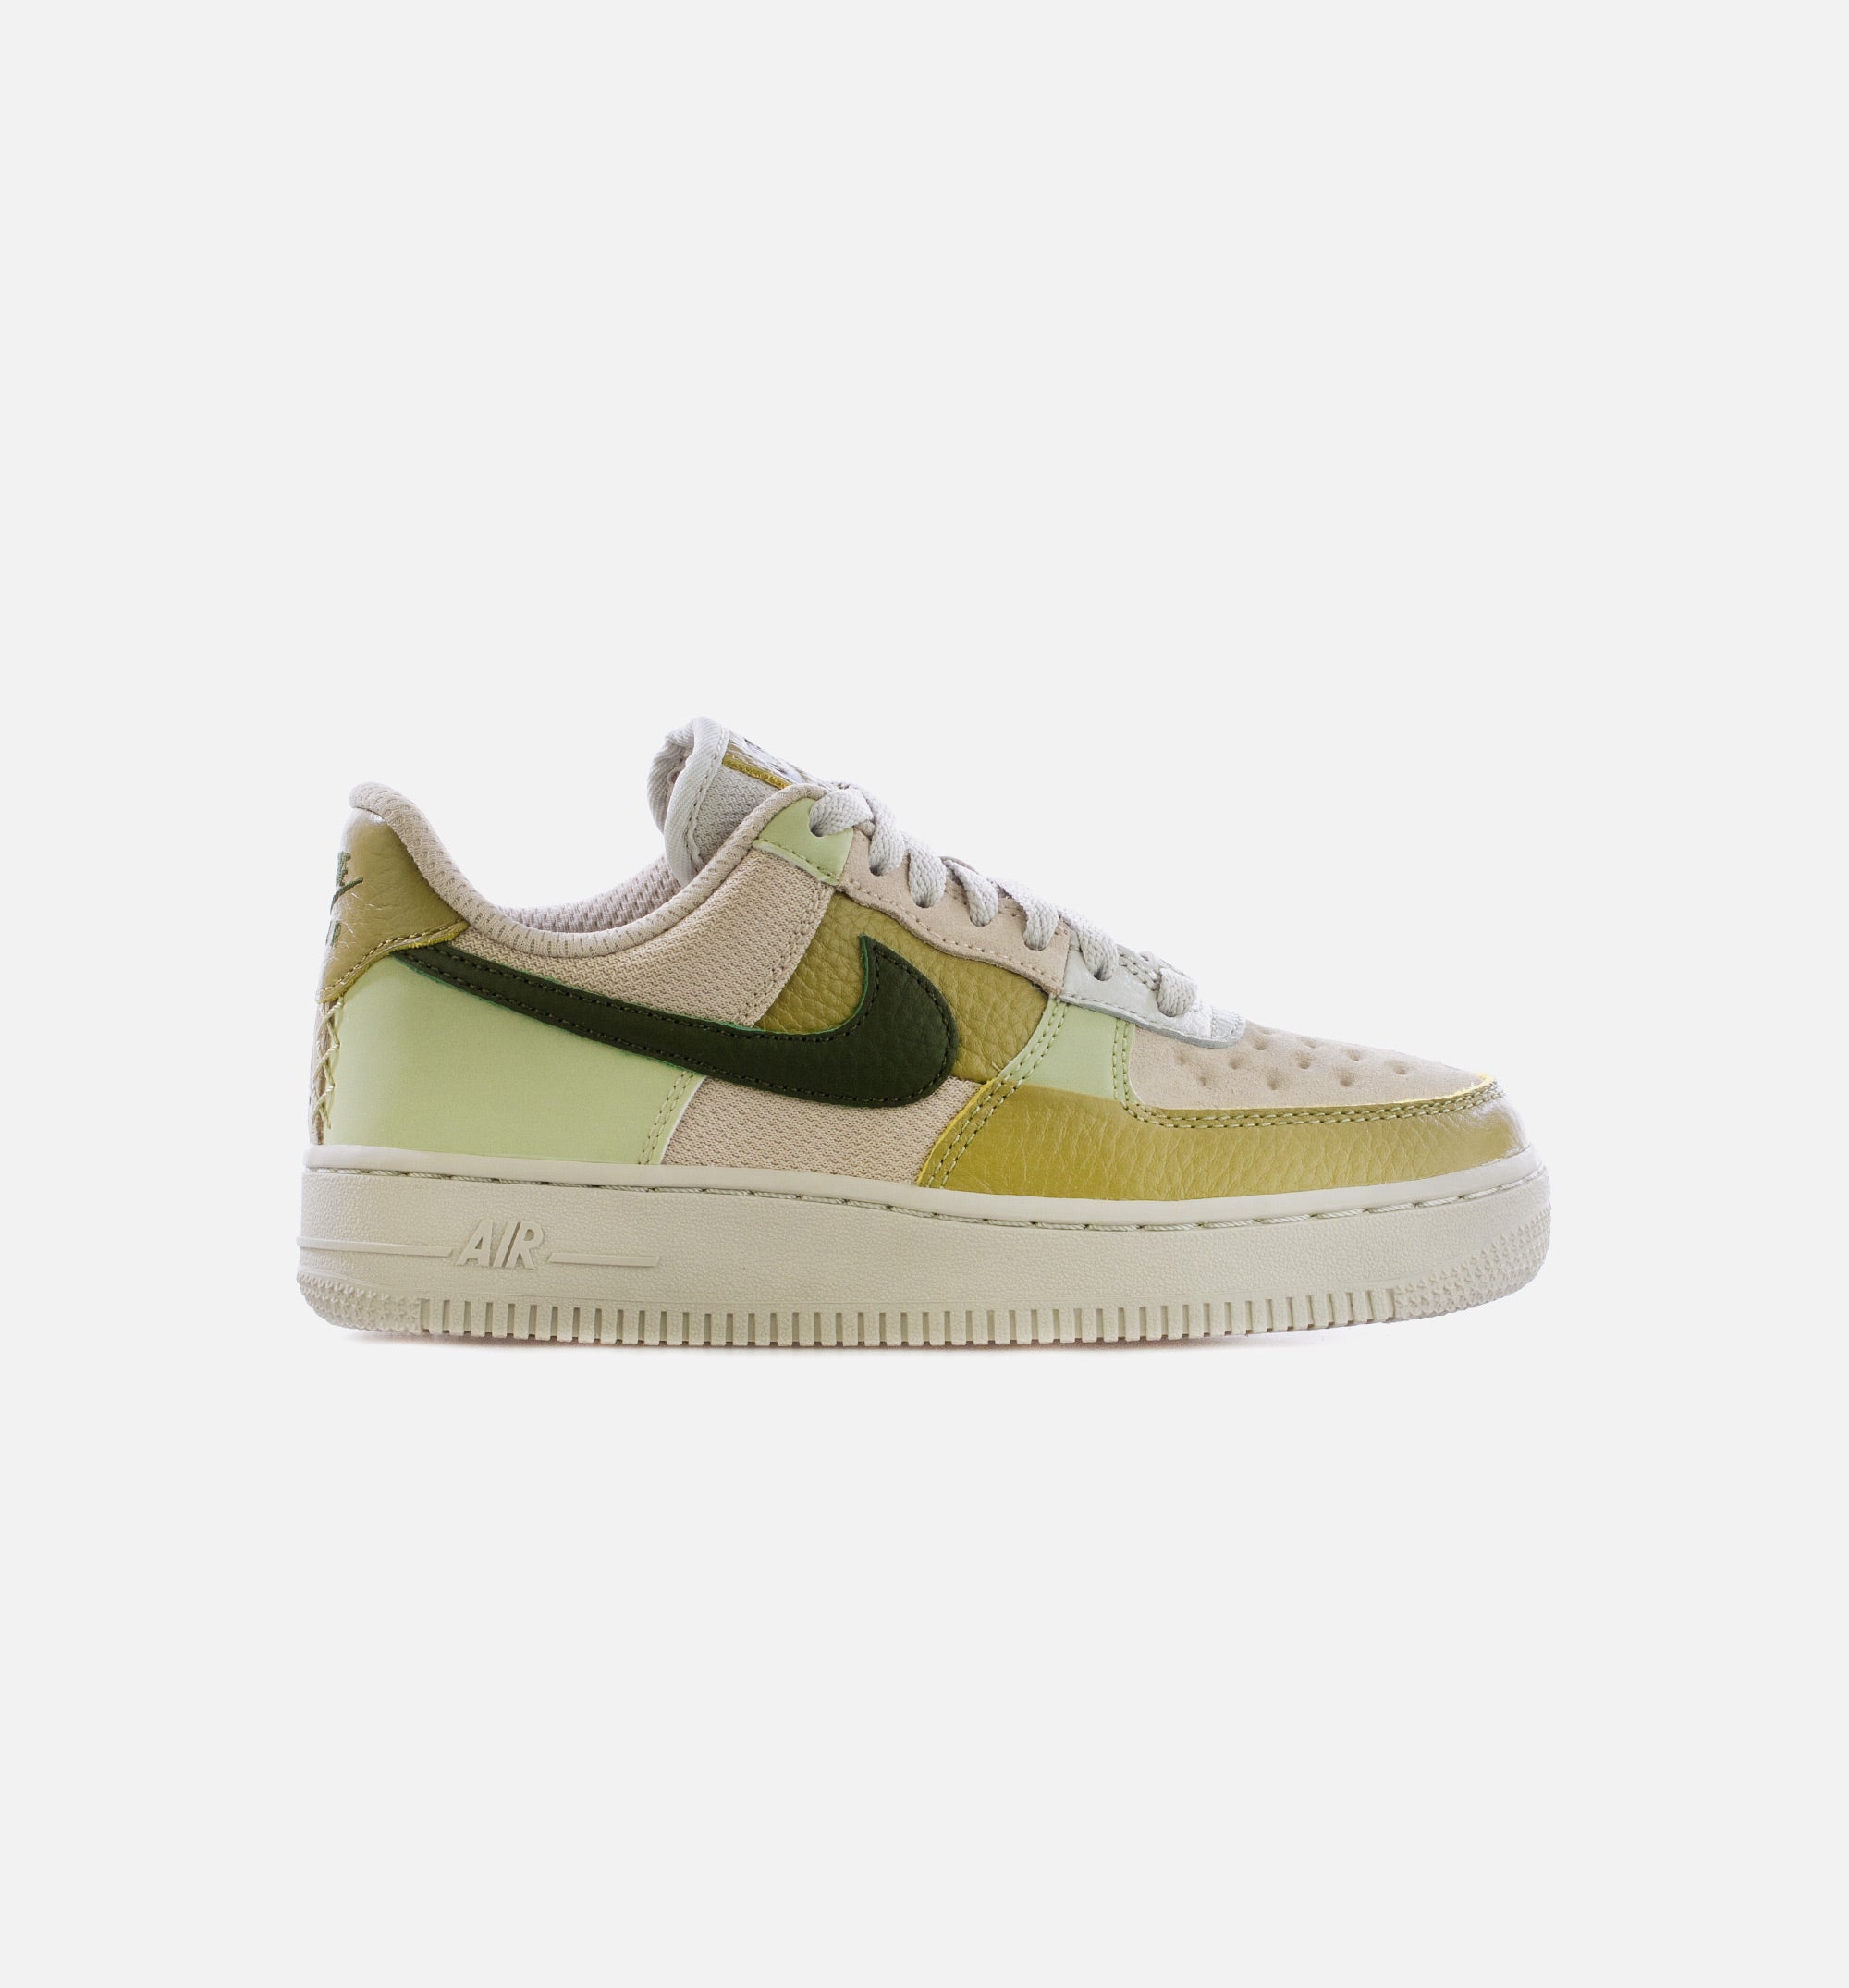 Nike Women's Air Force 1 Shadow Shoes, Size 6.5, White/Green/Yellow